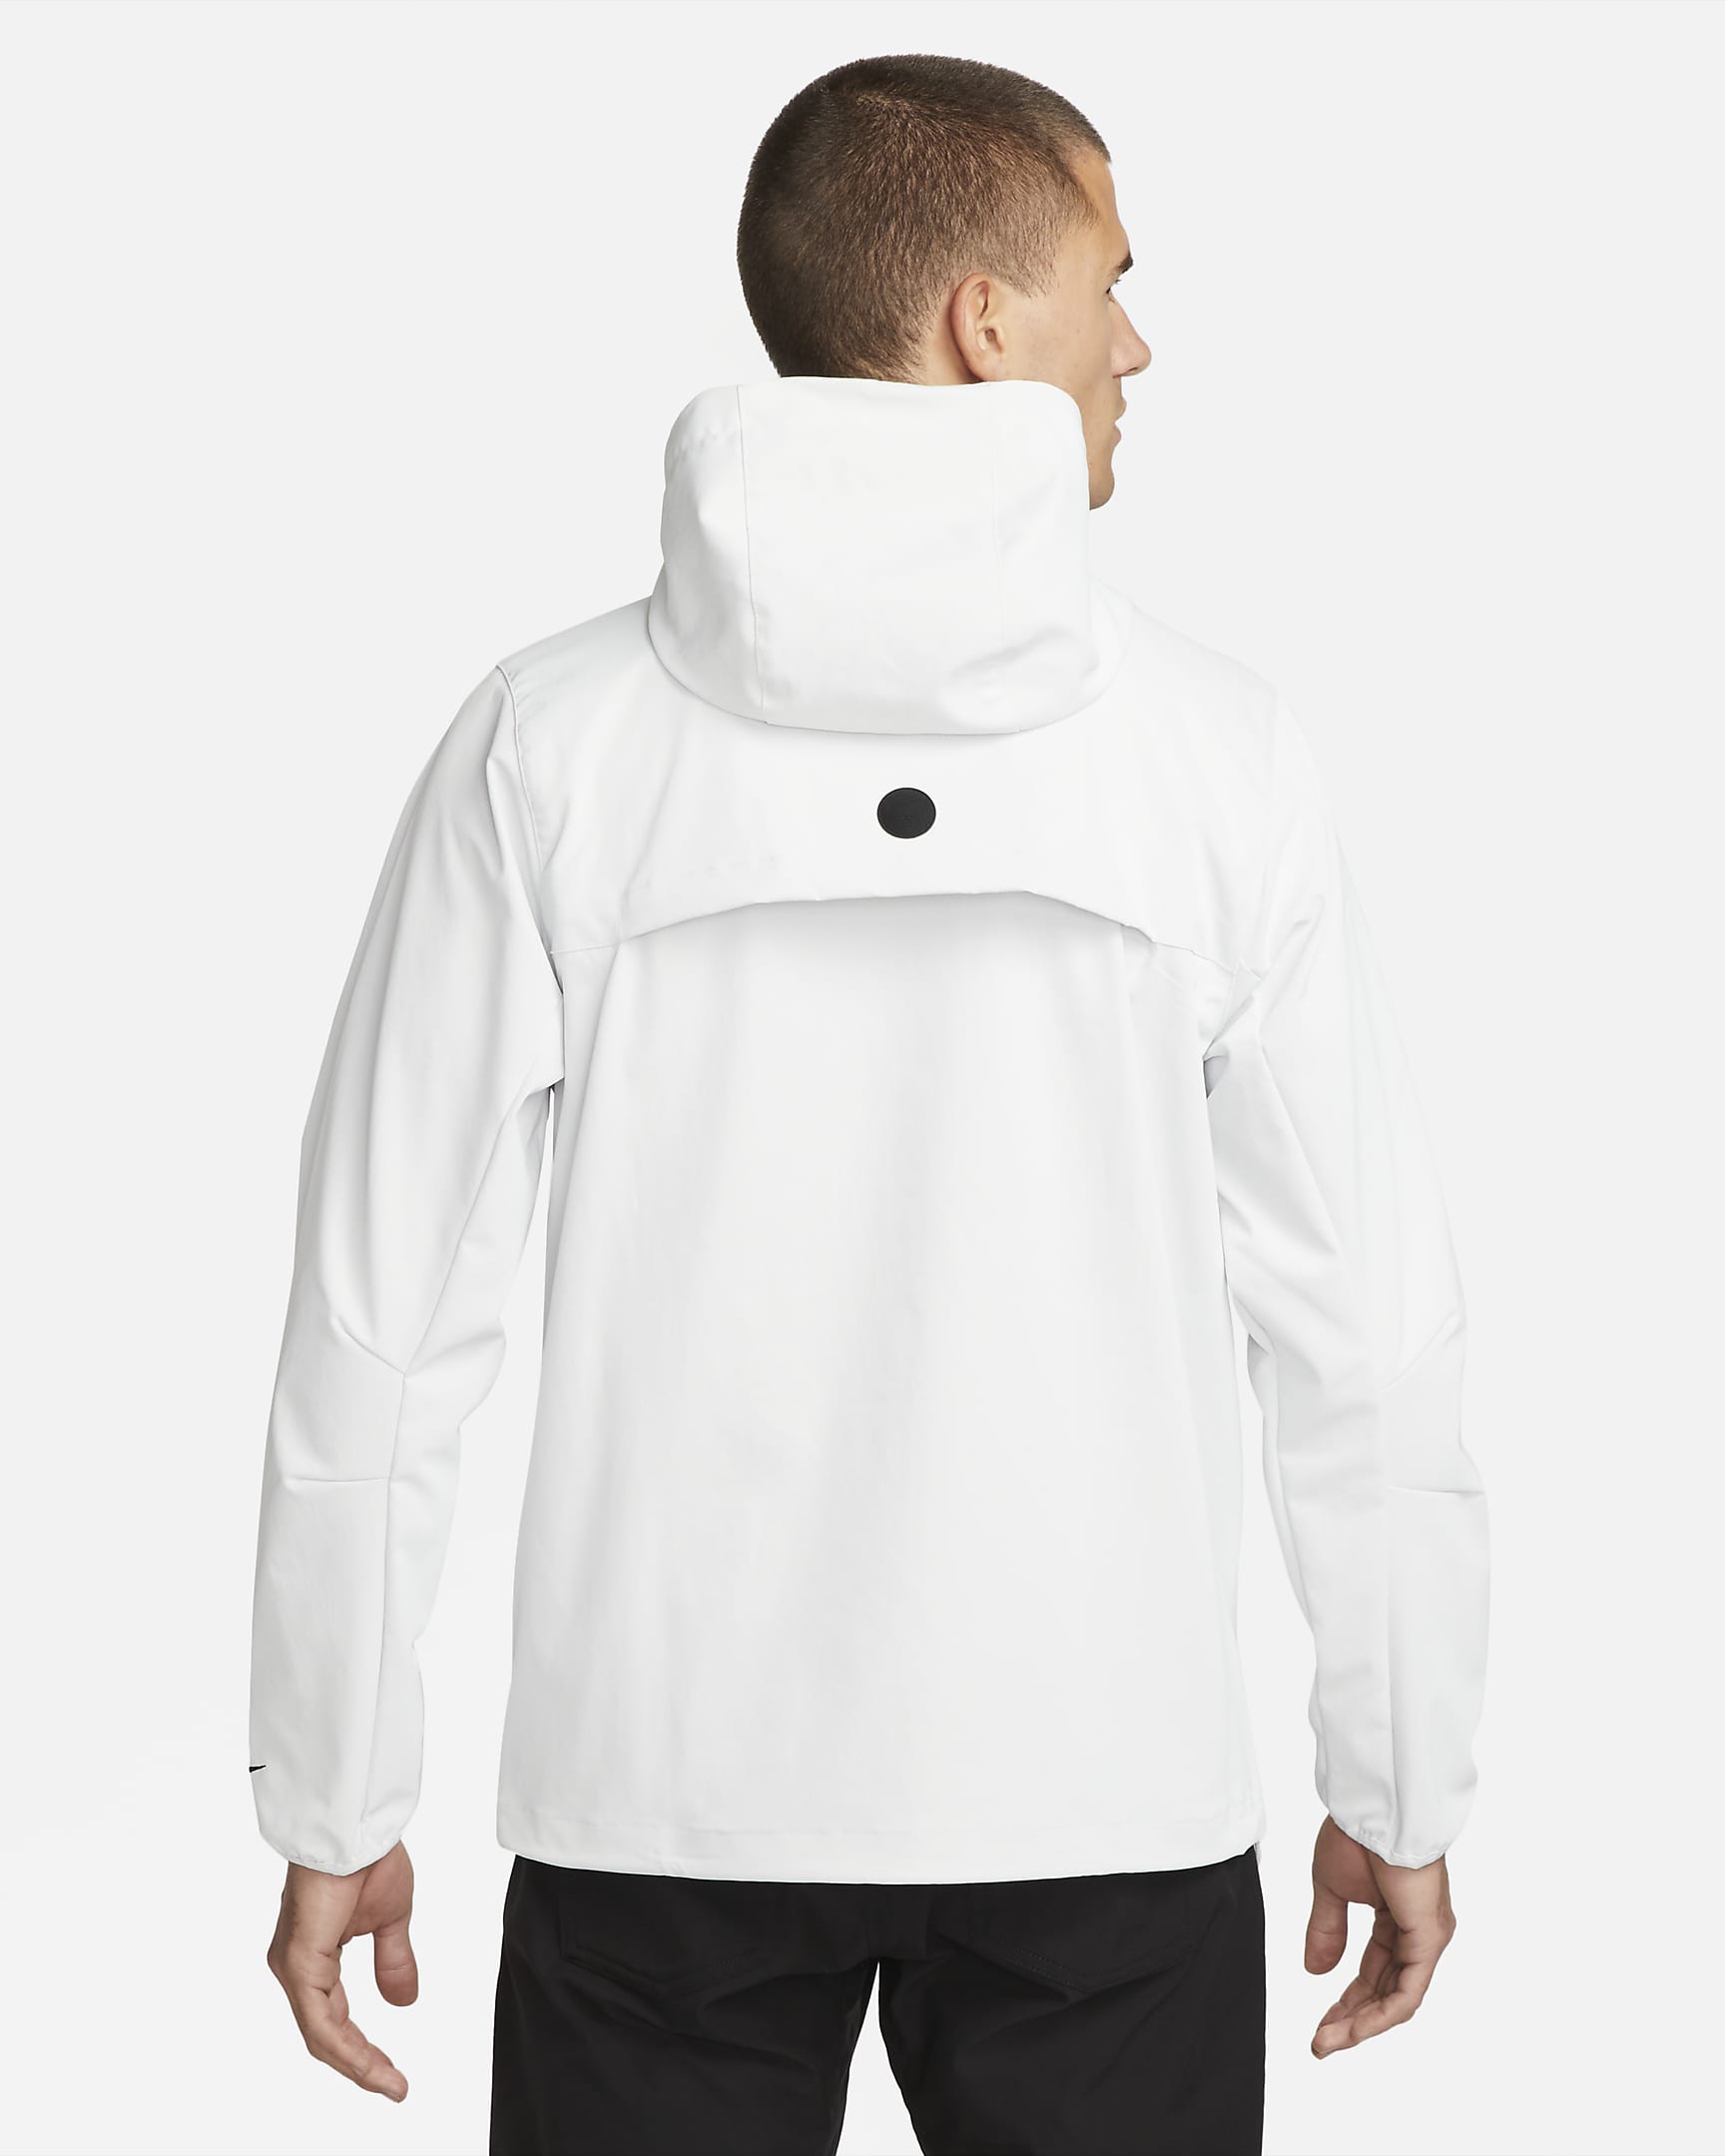 Nike Unscripted Repel Men's Anorak Golf Jacket. Nike NO